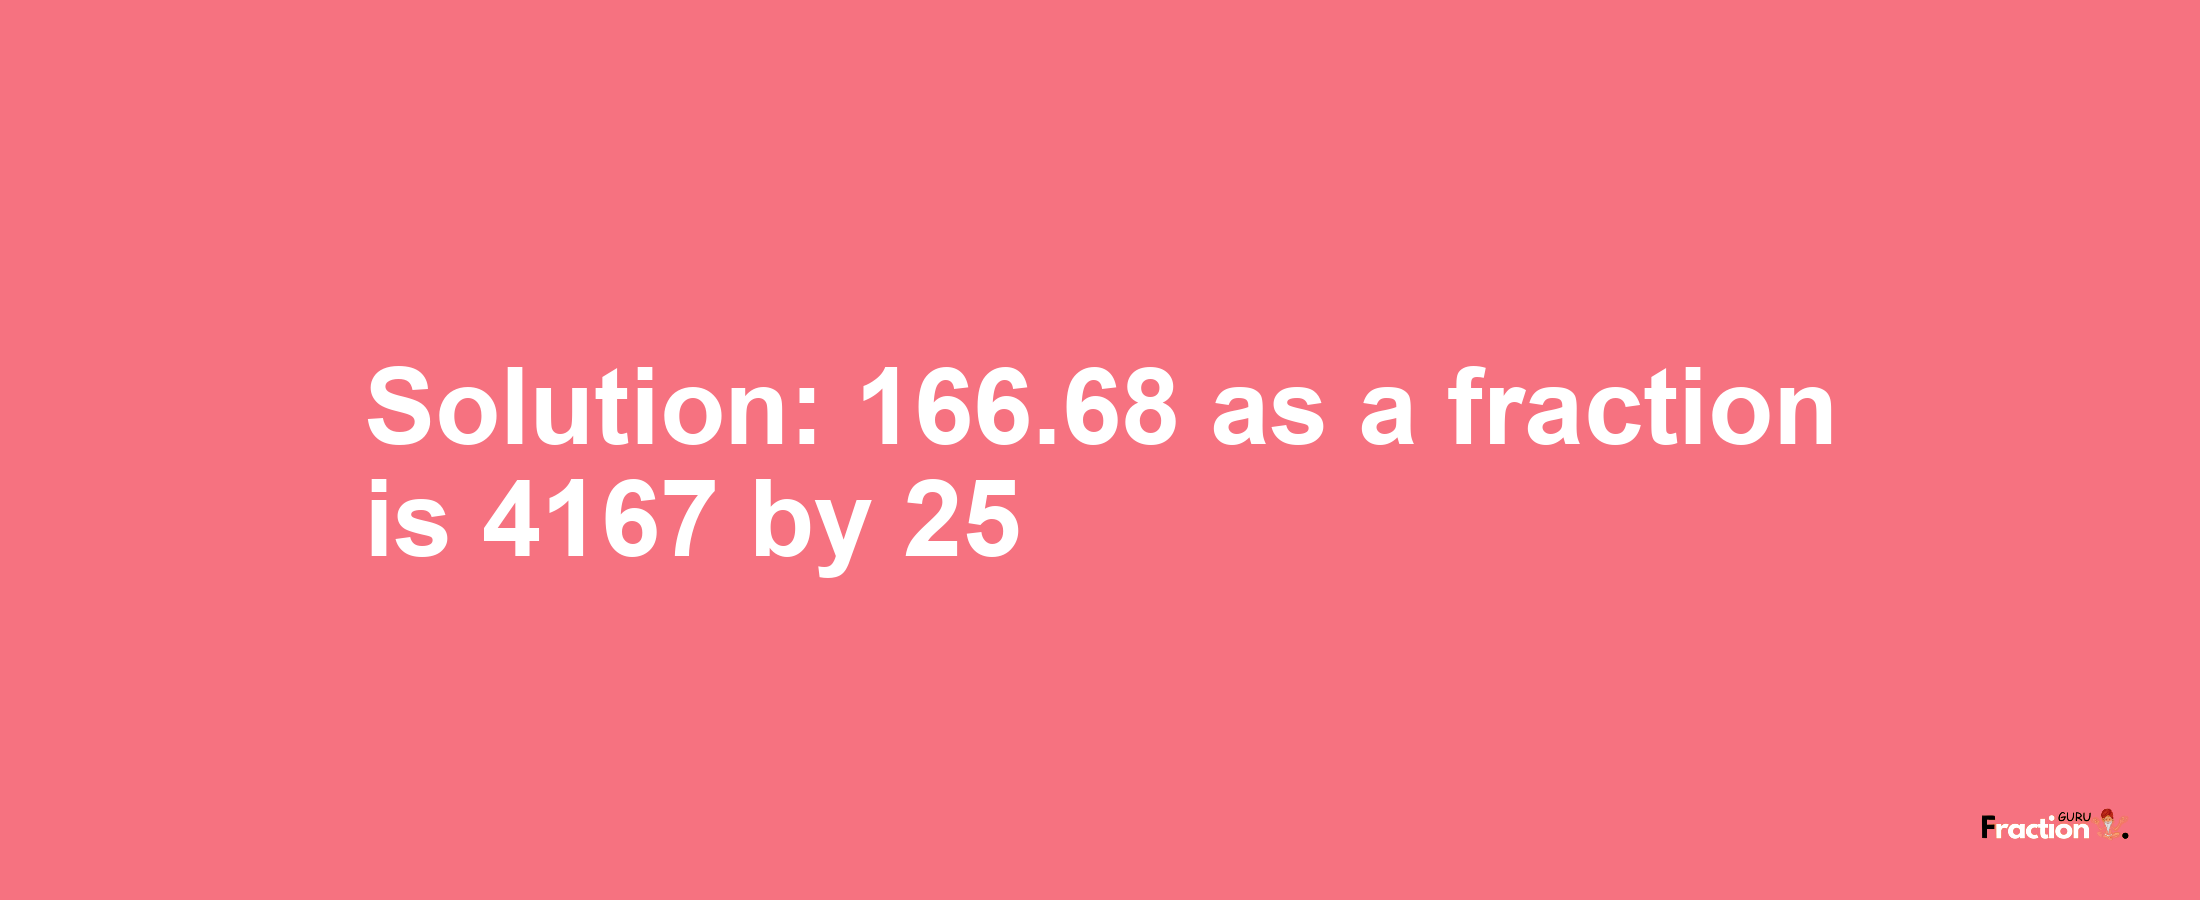 Solution:166.68 as a fraction is 4167/25